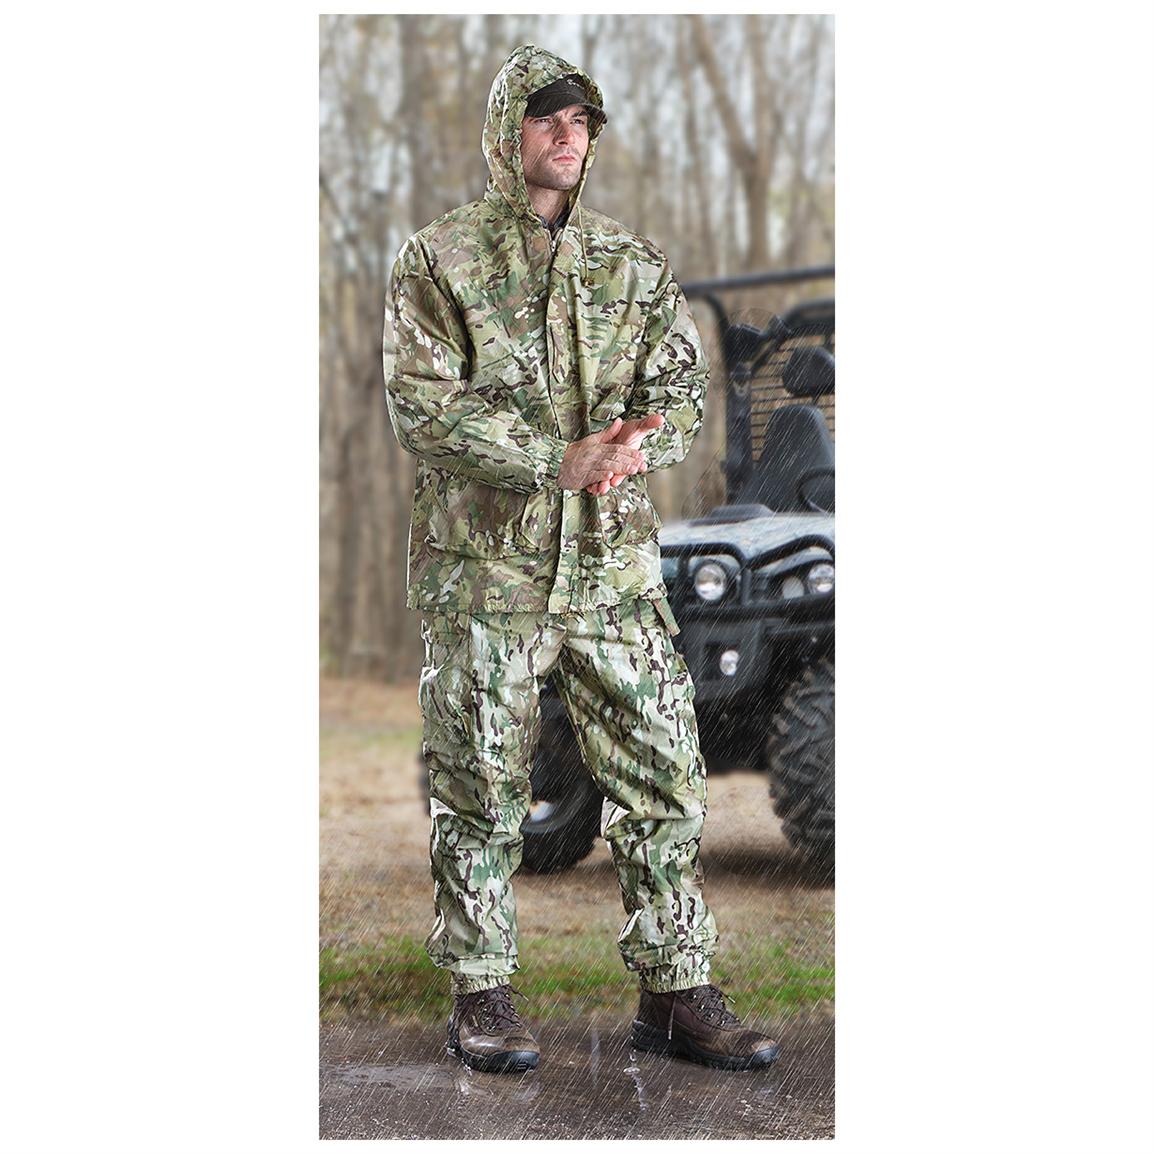 Waterproof 2 Piece Army Military Wet Weather Rain Suit Jacket & Trousers Set NEW 